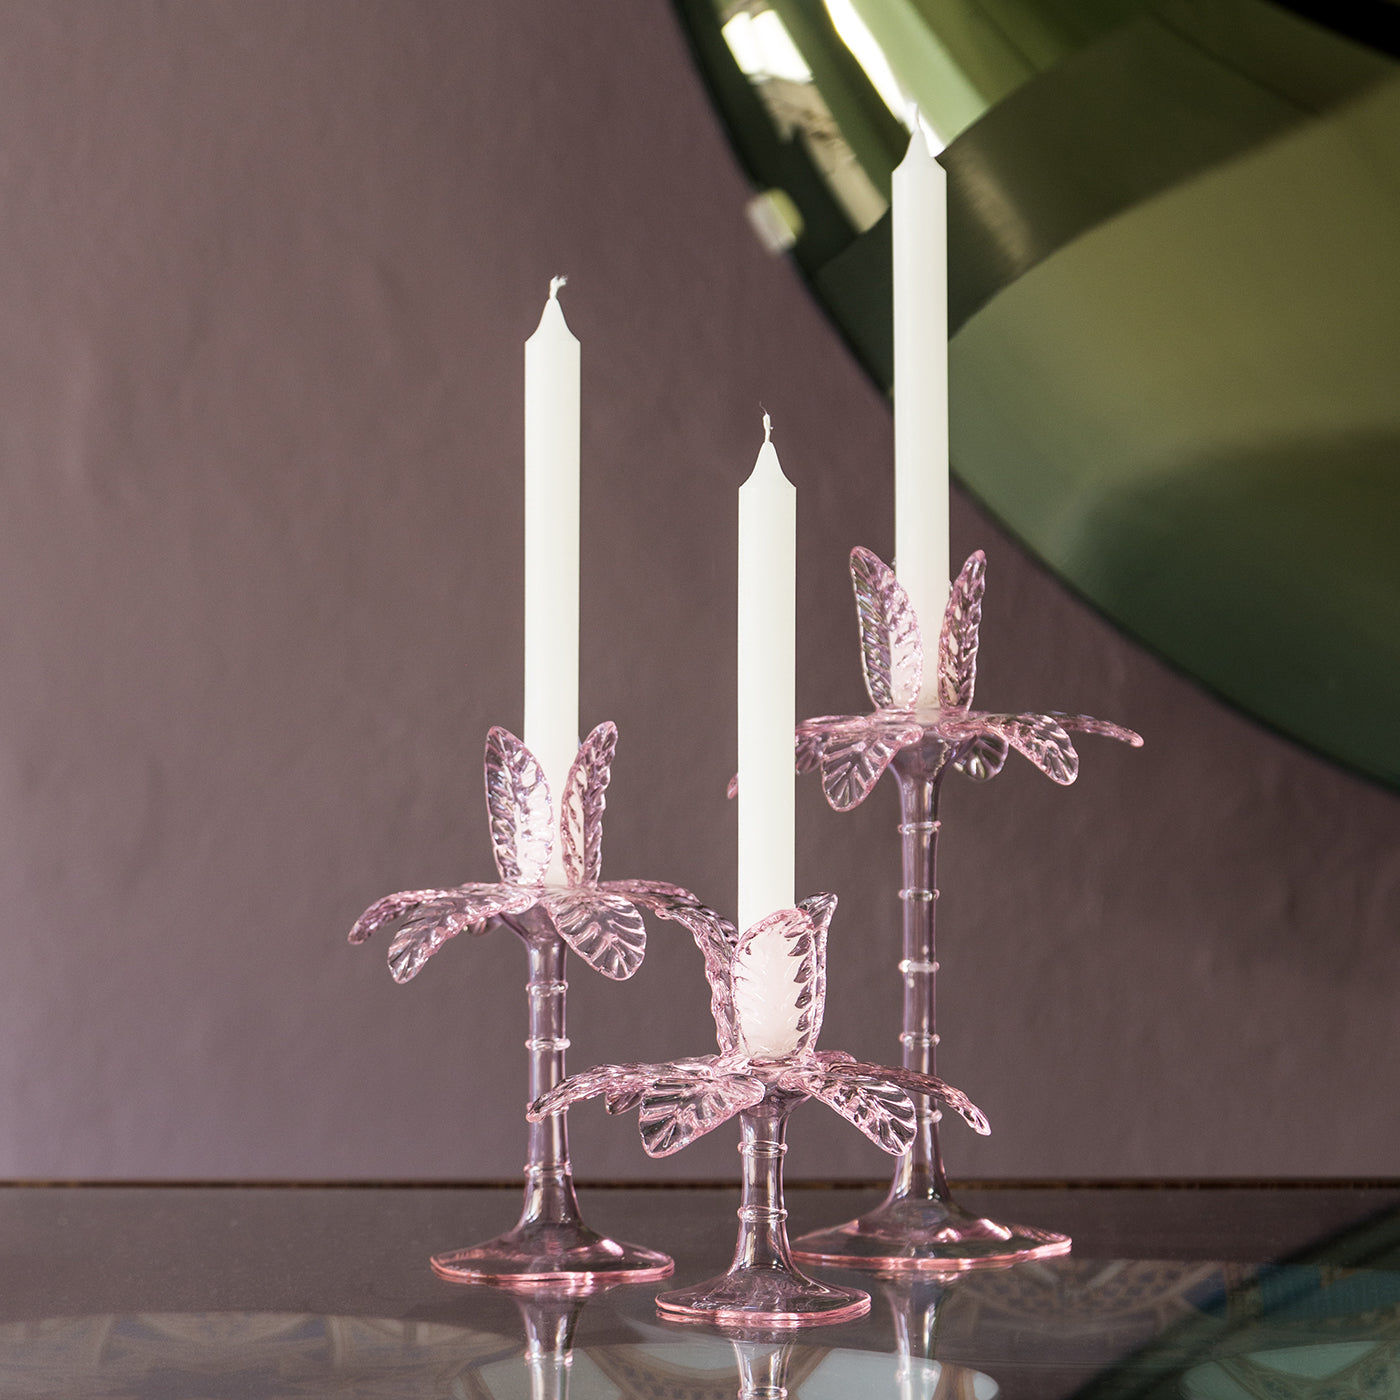 Las Palmas Small Pink Candle Holder - Alternative view 4